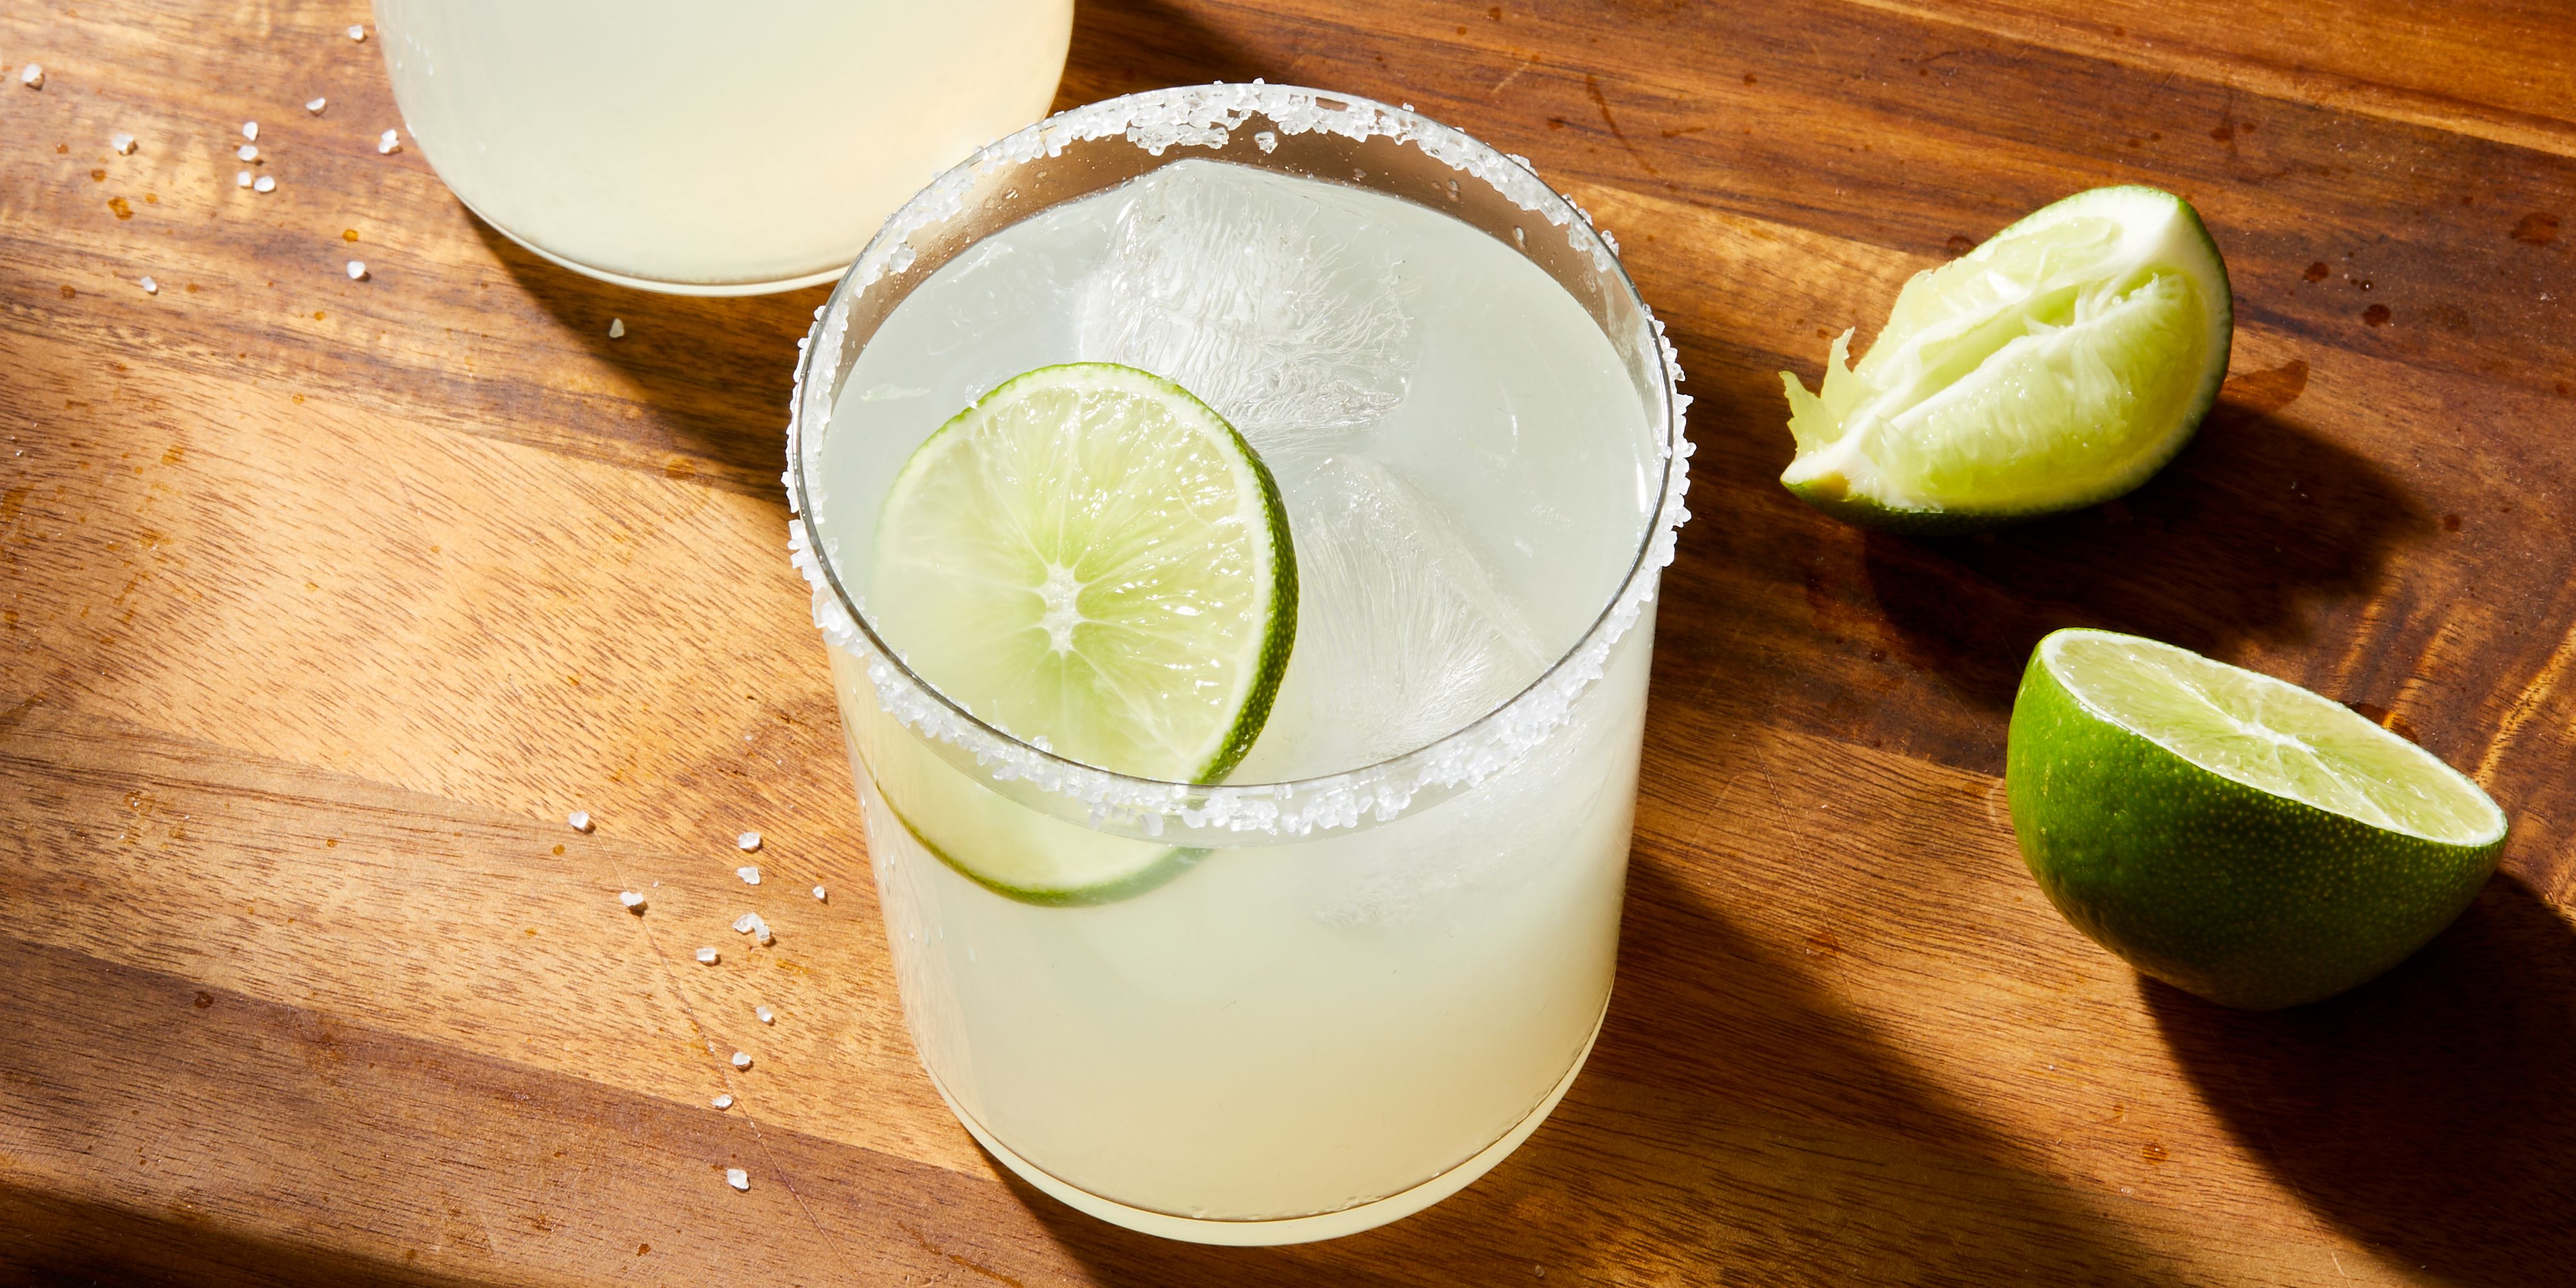 Classic Margarita Is a Simple and Delicious Cocktail.